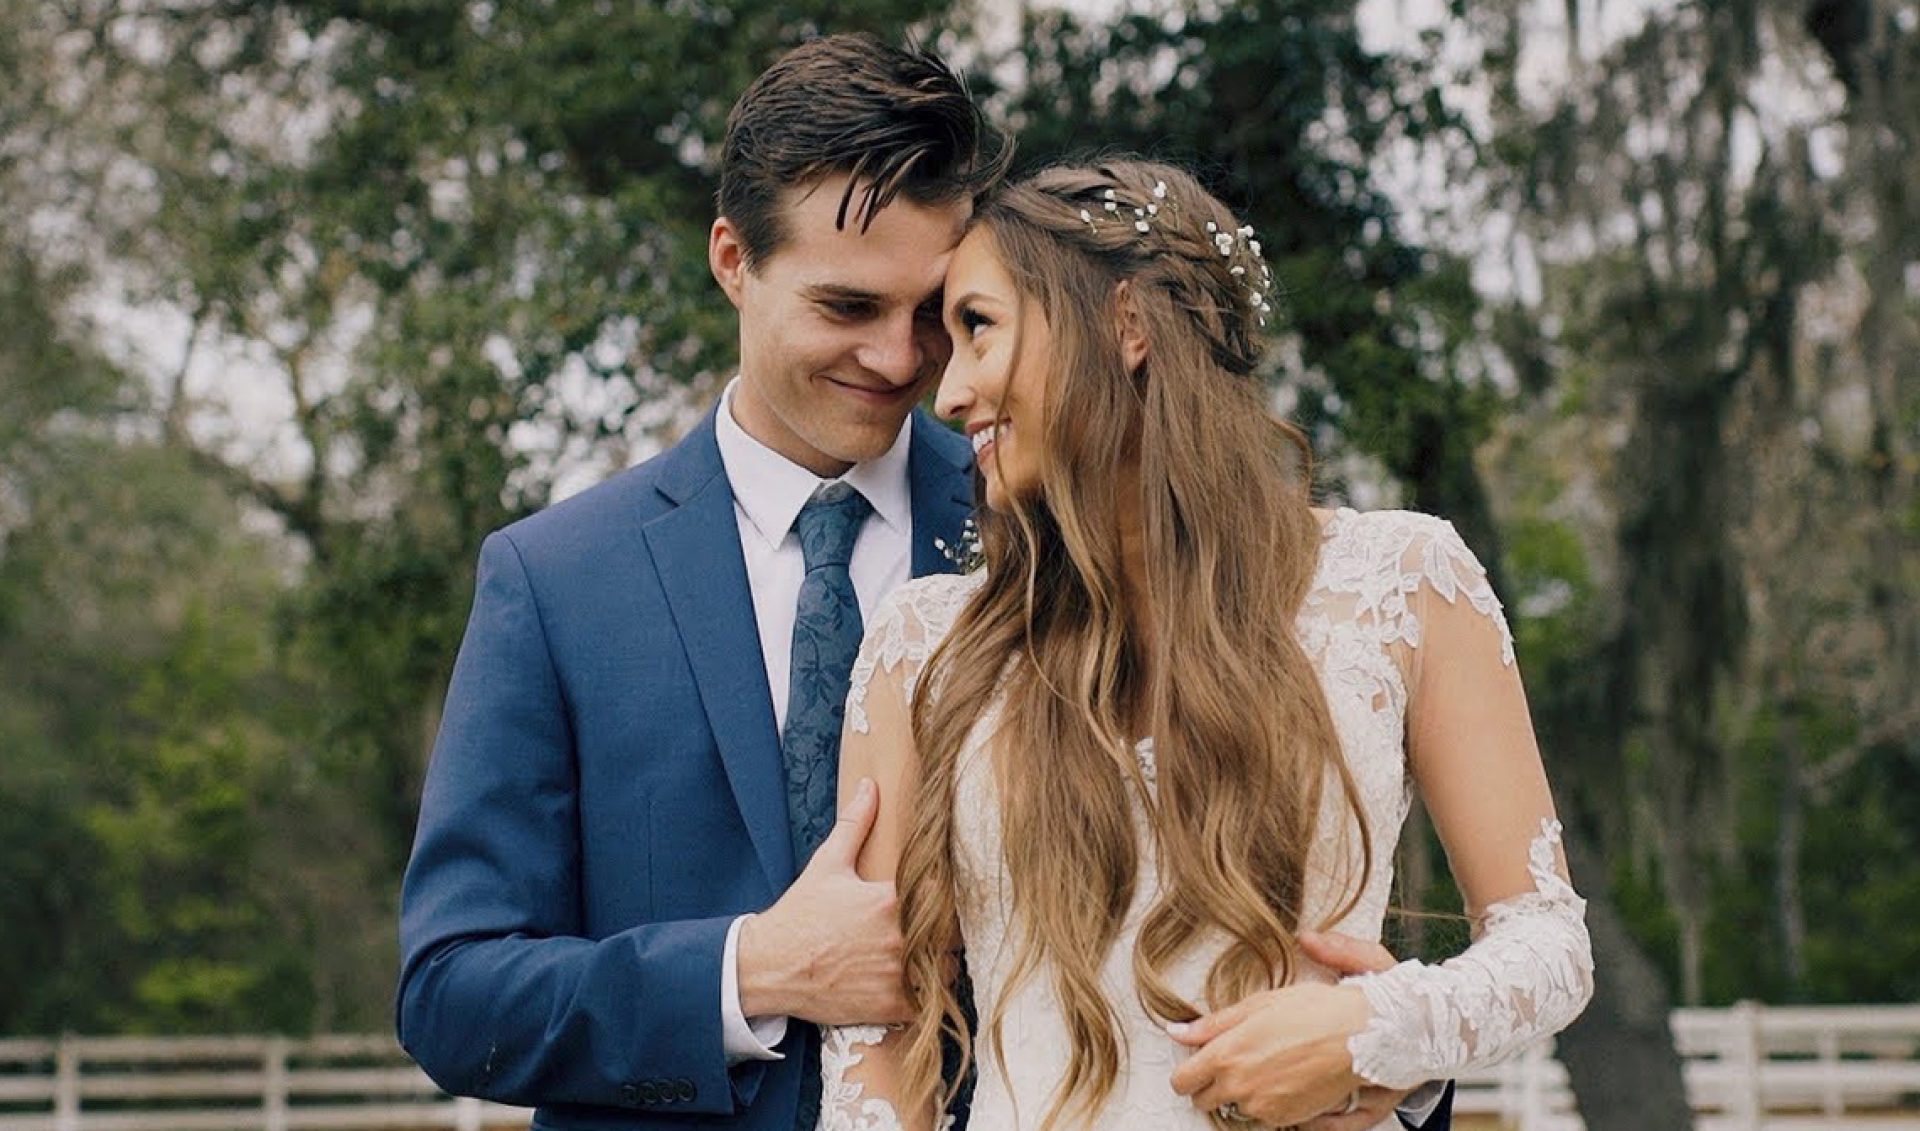 YouTubers Kristin And Marcus Johns Both Recovering From Surgery After Devastating Hit-And-Run